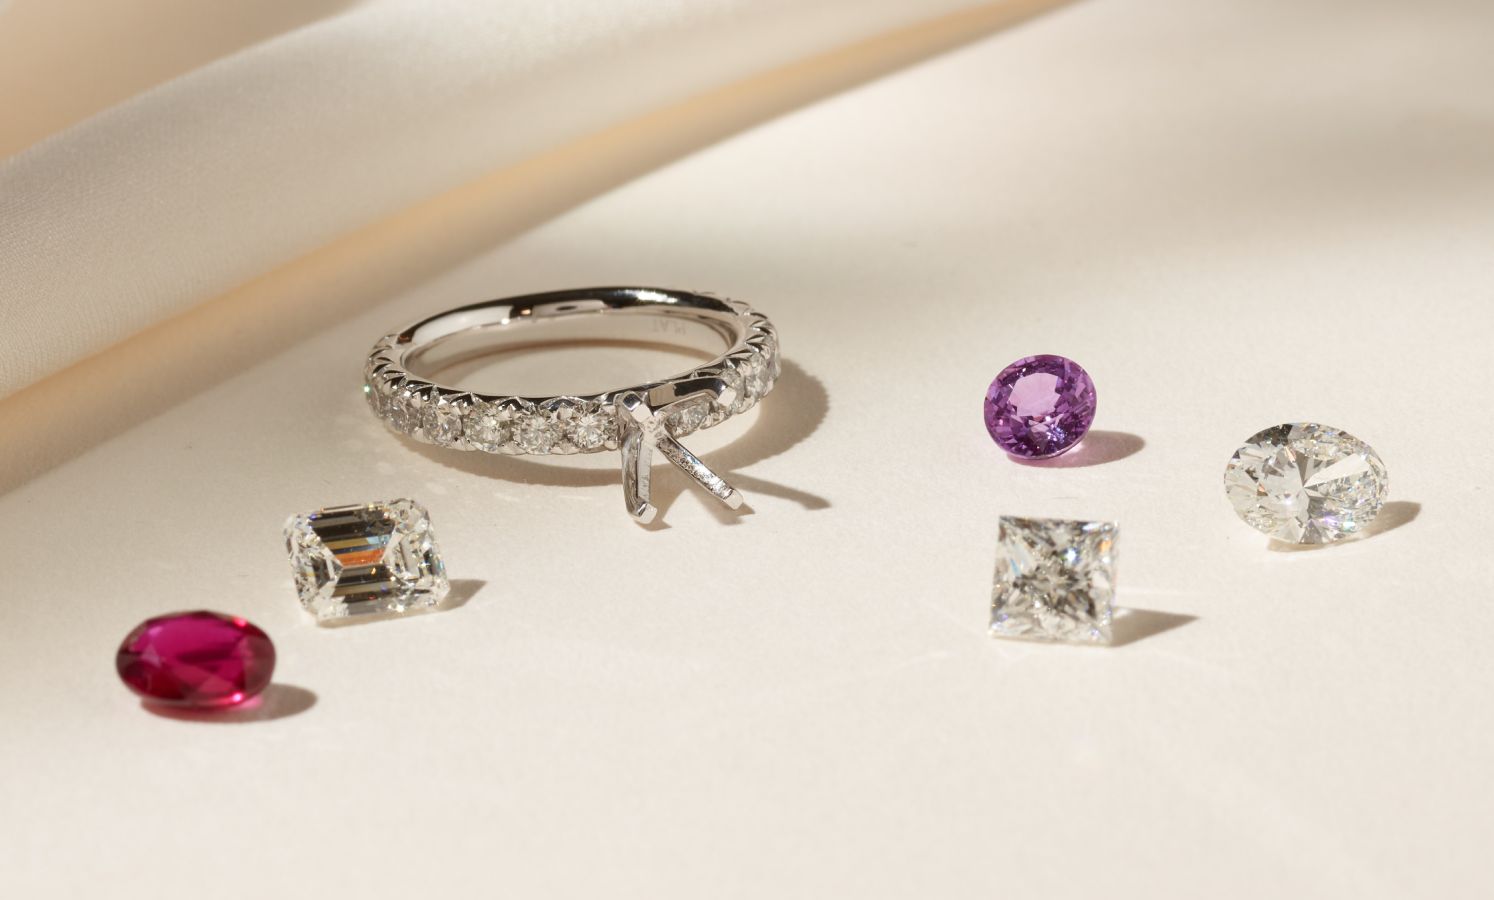 An engagement ring surrounded by loose gemstones